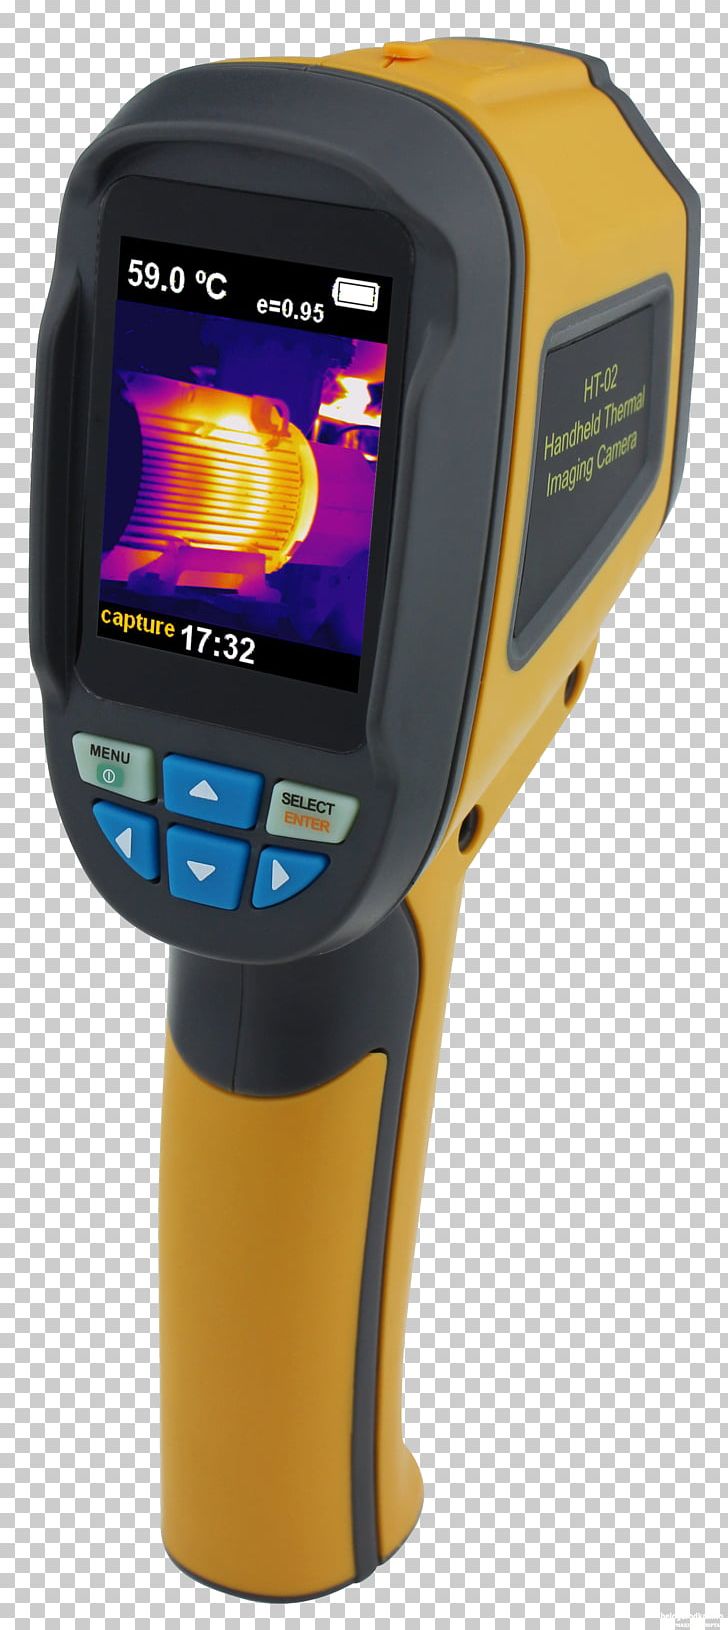 Thermographic Camera Infrared Thermal Imaging Cameras Thermography PNG, Clipart, Camera, Handheld Devices, Hardware, Infrared, Infrared Photography Free PNG Download